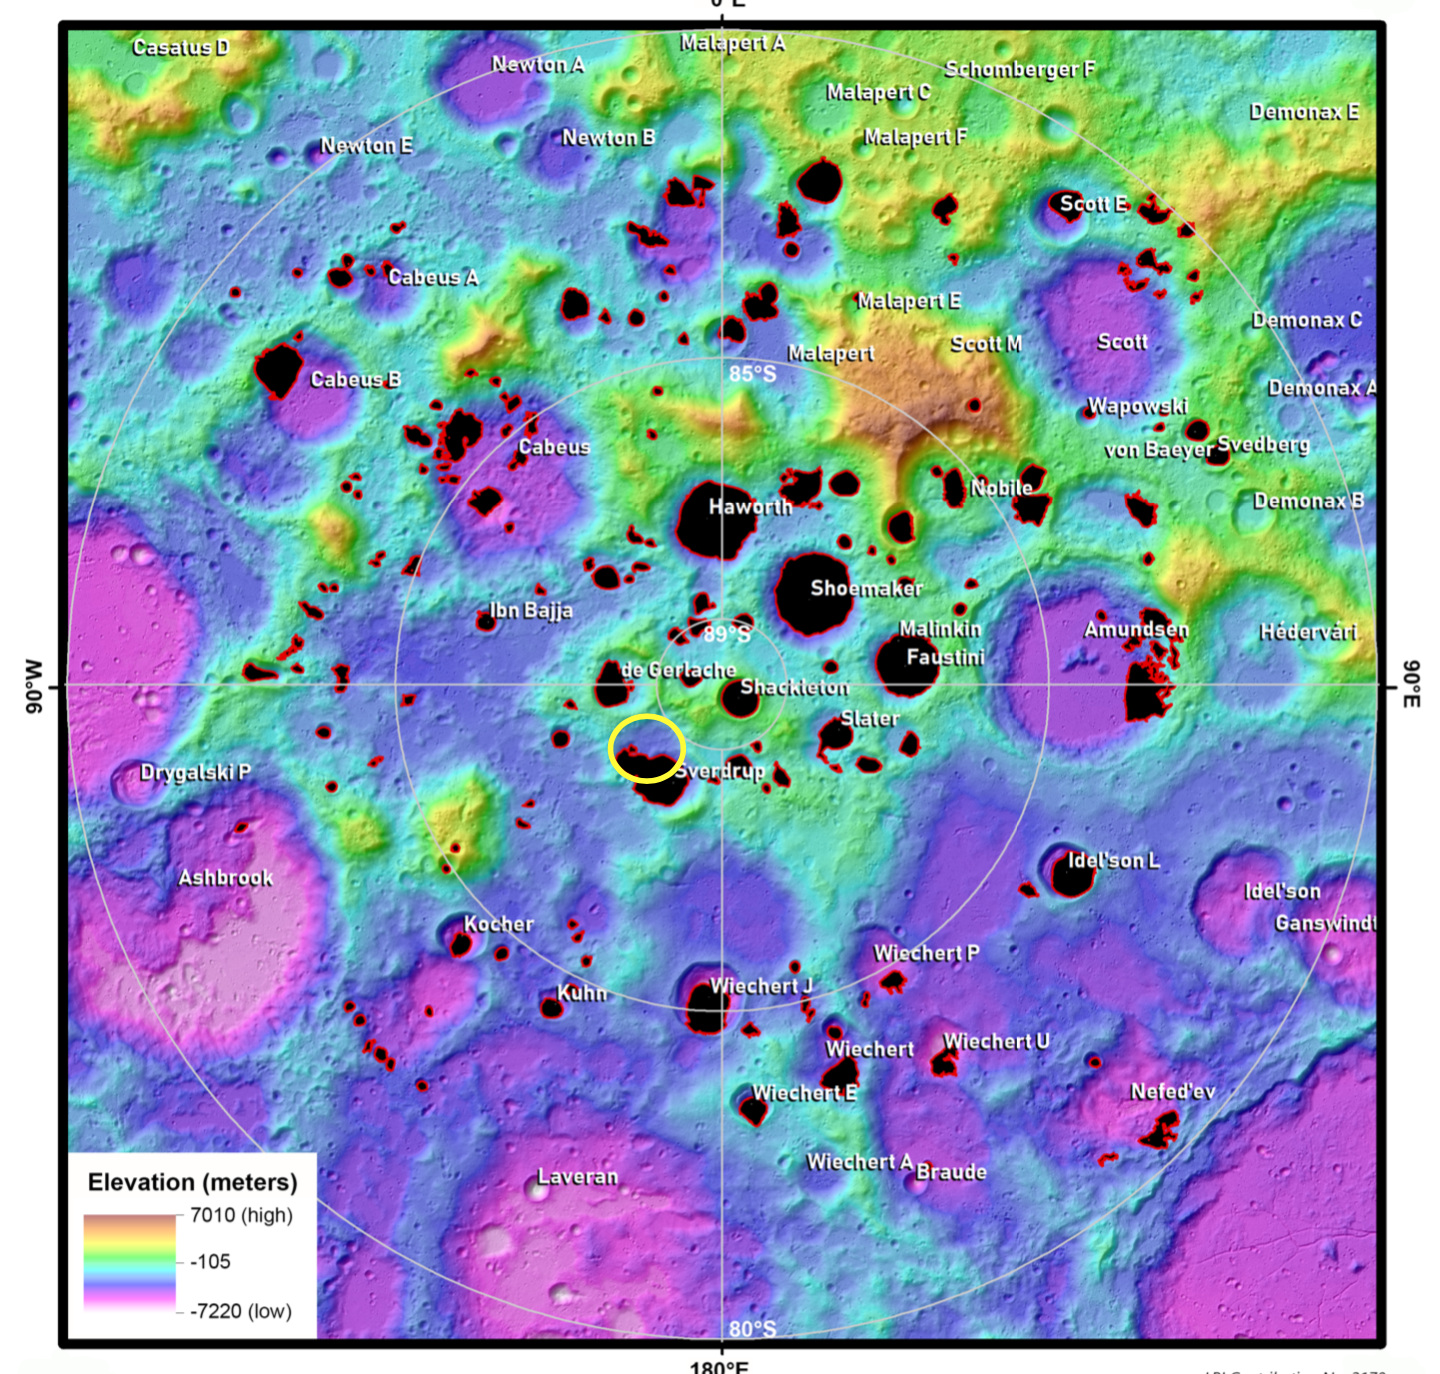 Map of the Moon's south pole, colorized with purple, green, and yellow hues indicating elevation. Labels for different craters are included.